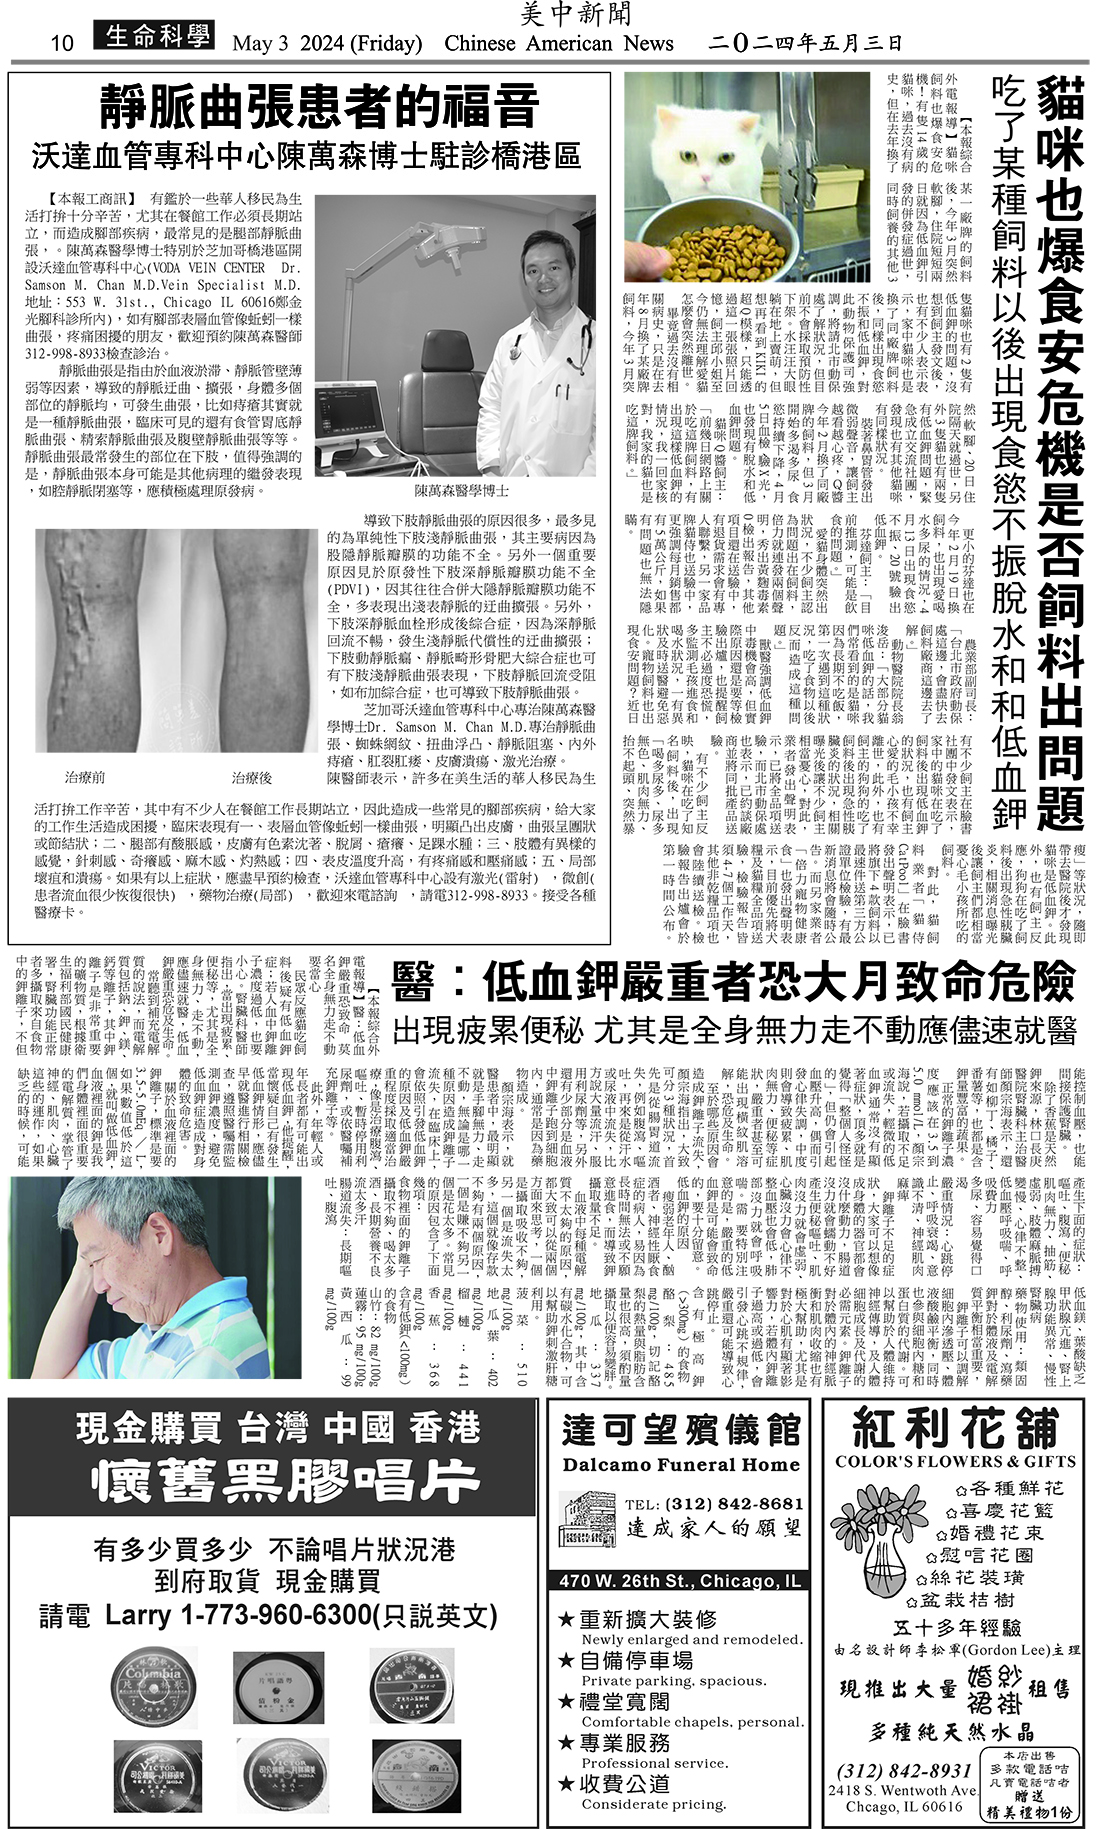 Chinese American News Page10